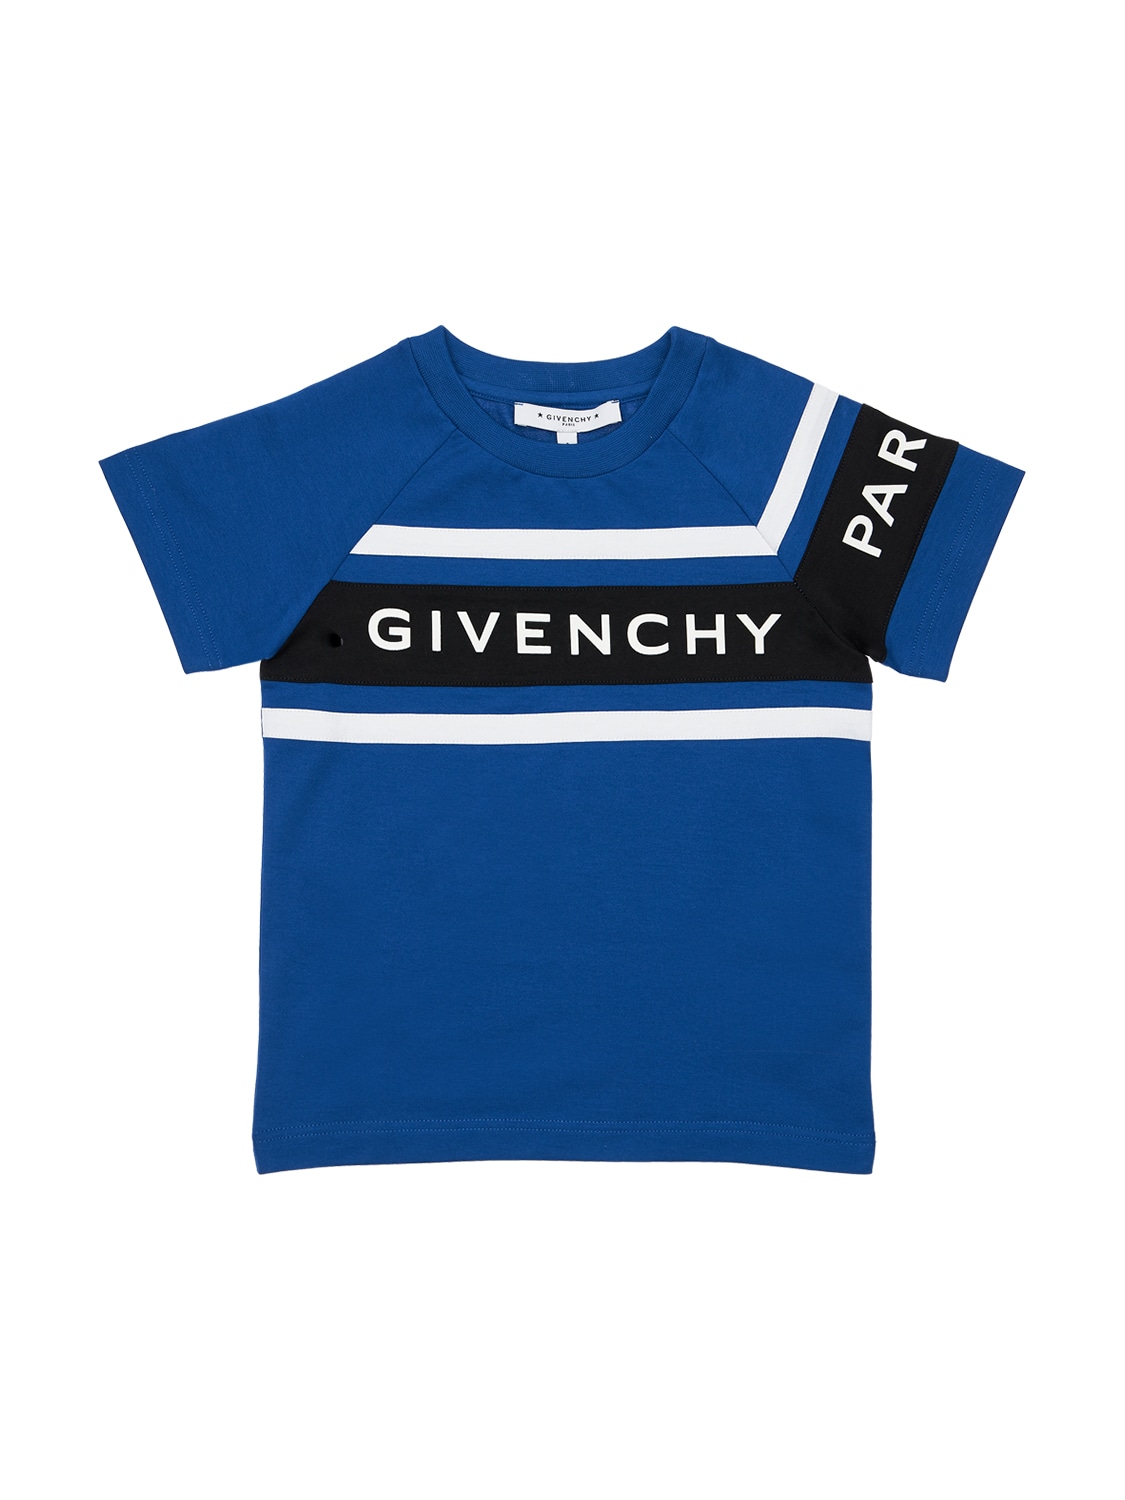 Givenchy Kids' Logo Printed Cotton Jersey T-shirt In Royal Blue